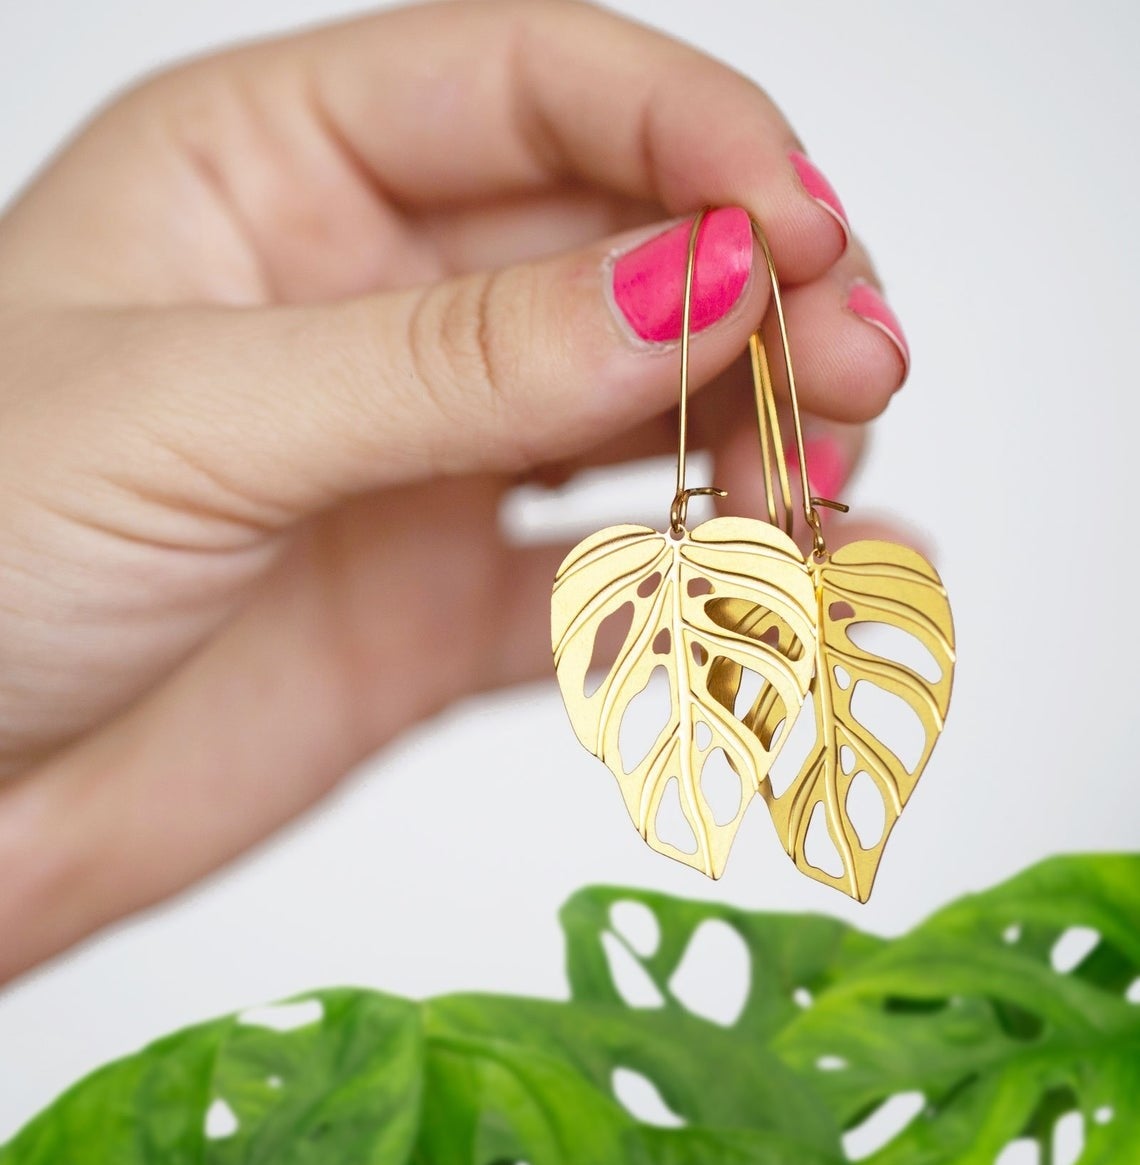 A person holding the monstera earrings above a plant